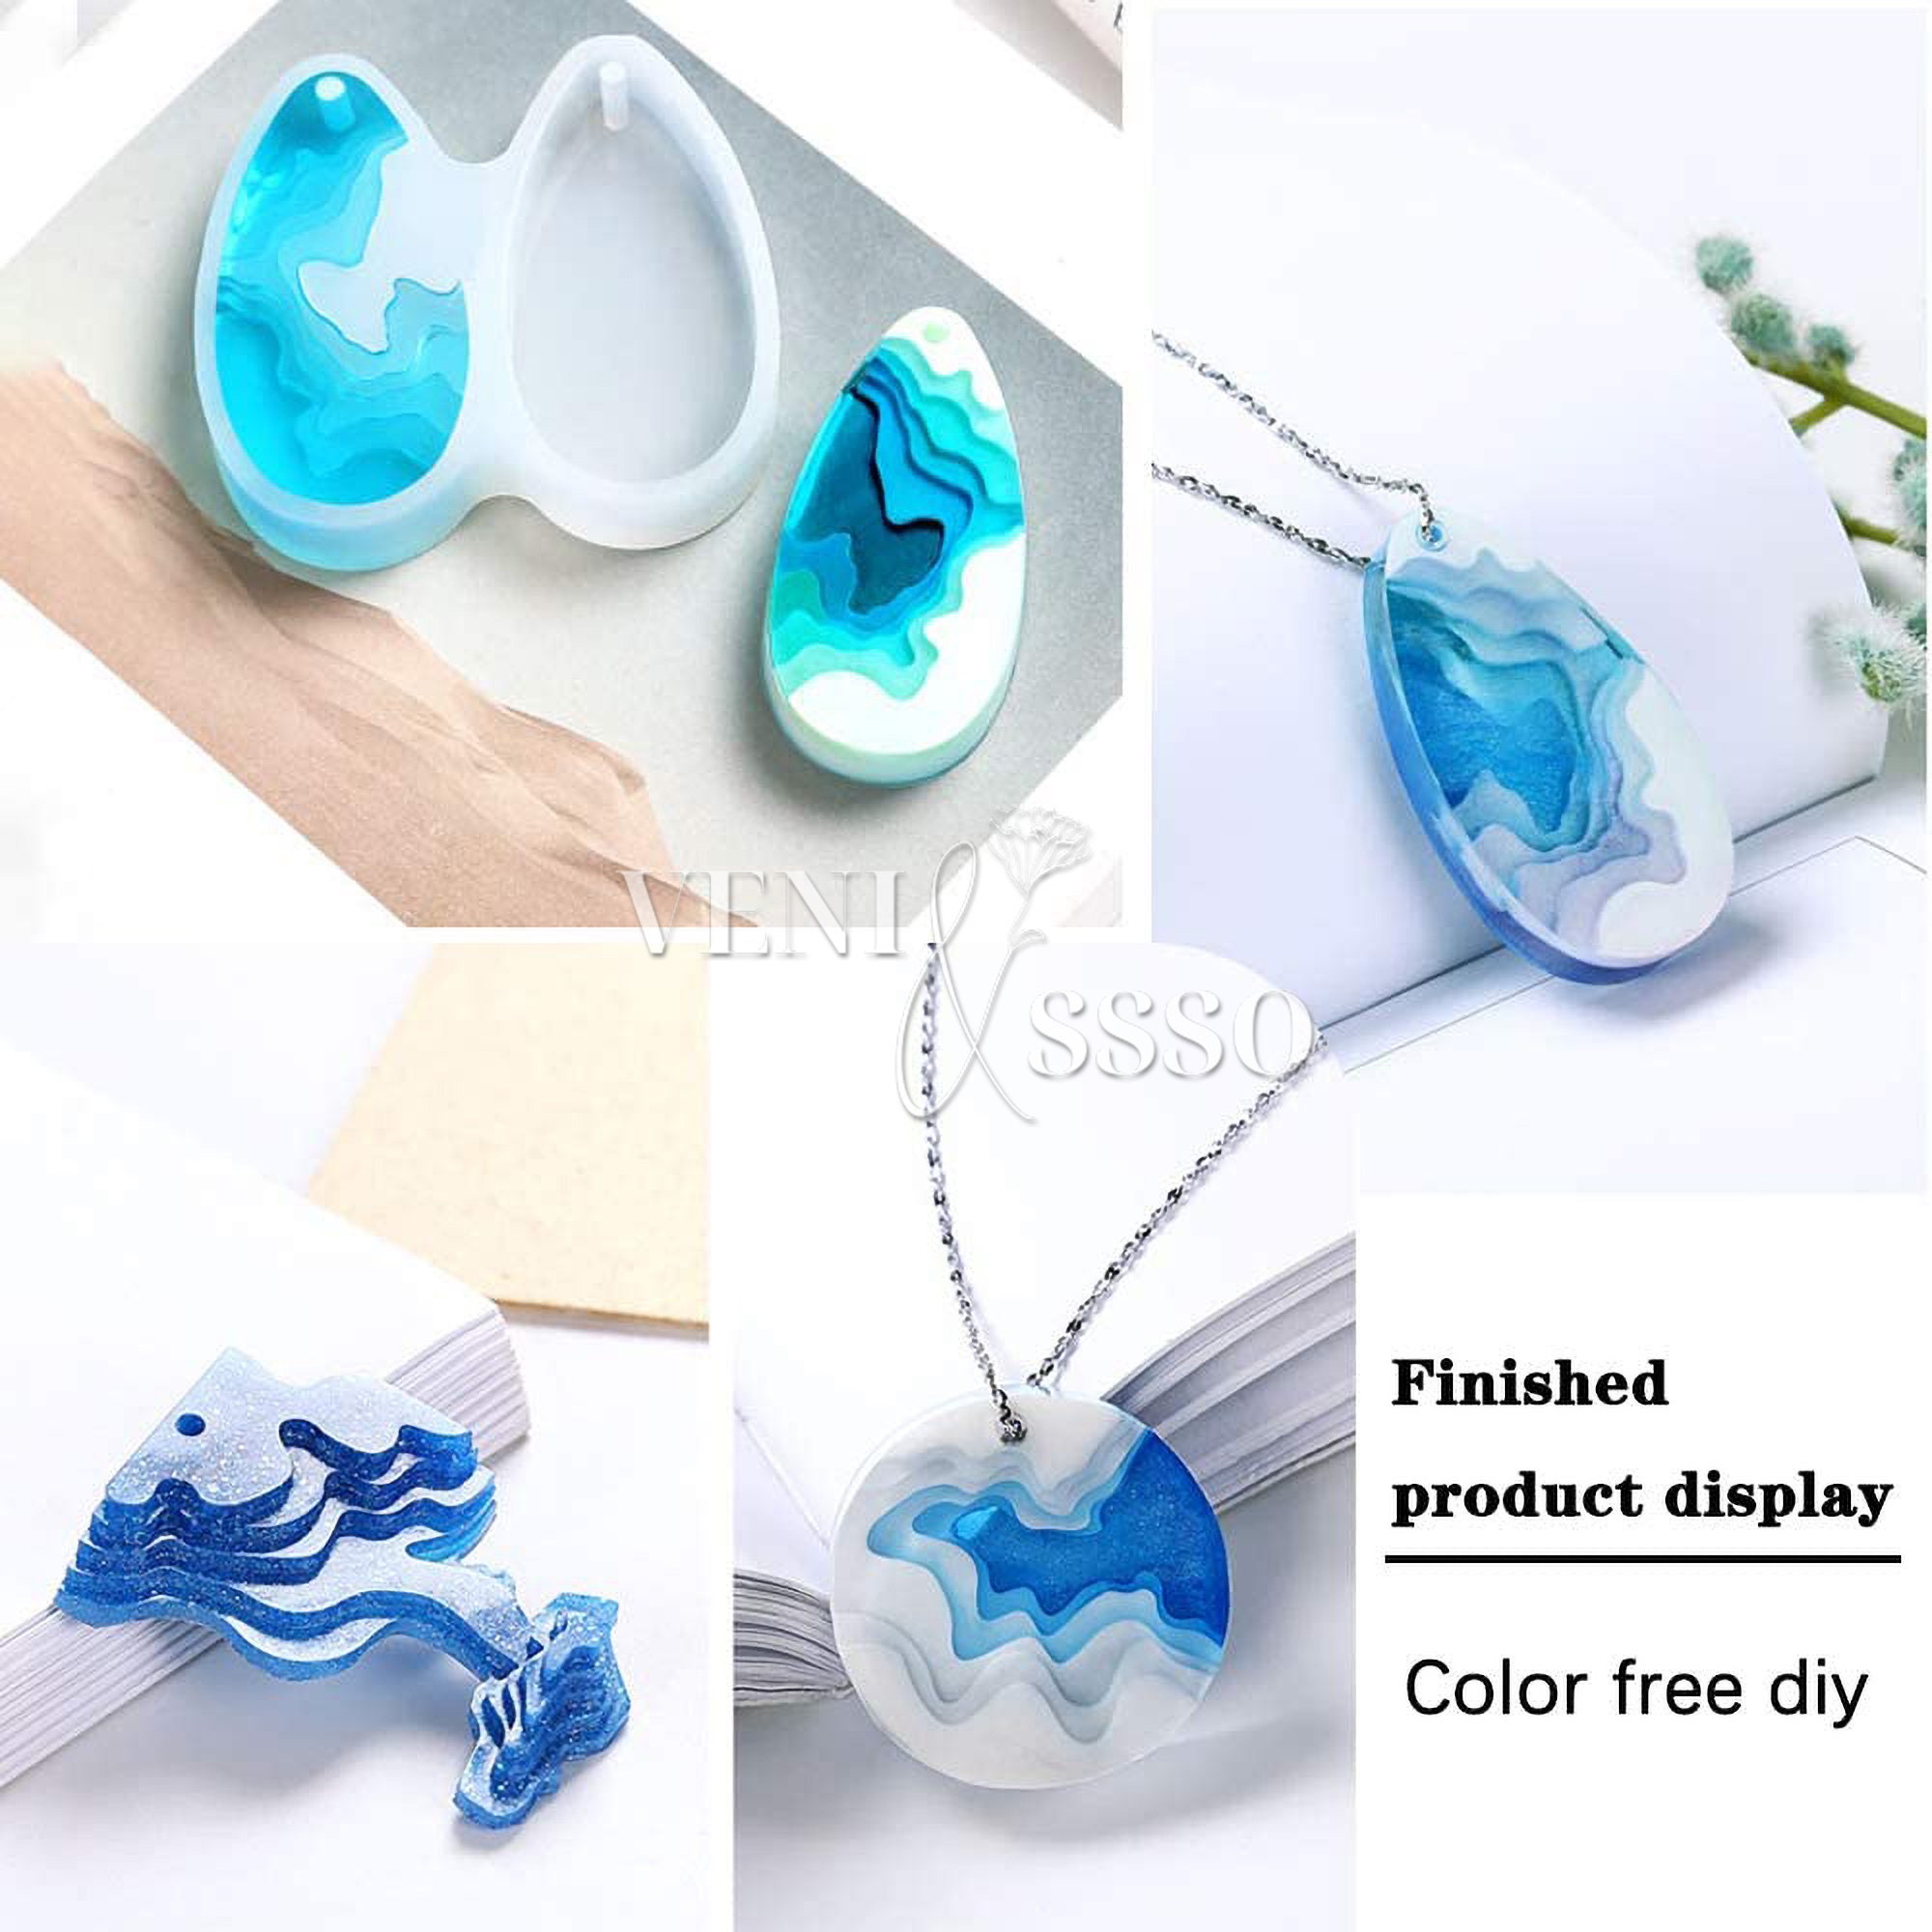 ZQYSING (4 Pack) Island Resin Pendant Molds, Pendant Silicone Molds Jewelry Resin Casting Molds for Earrings Necklace Keychains UV Resin Ocean Style